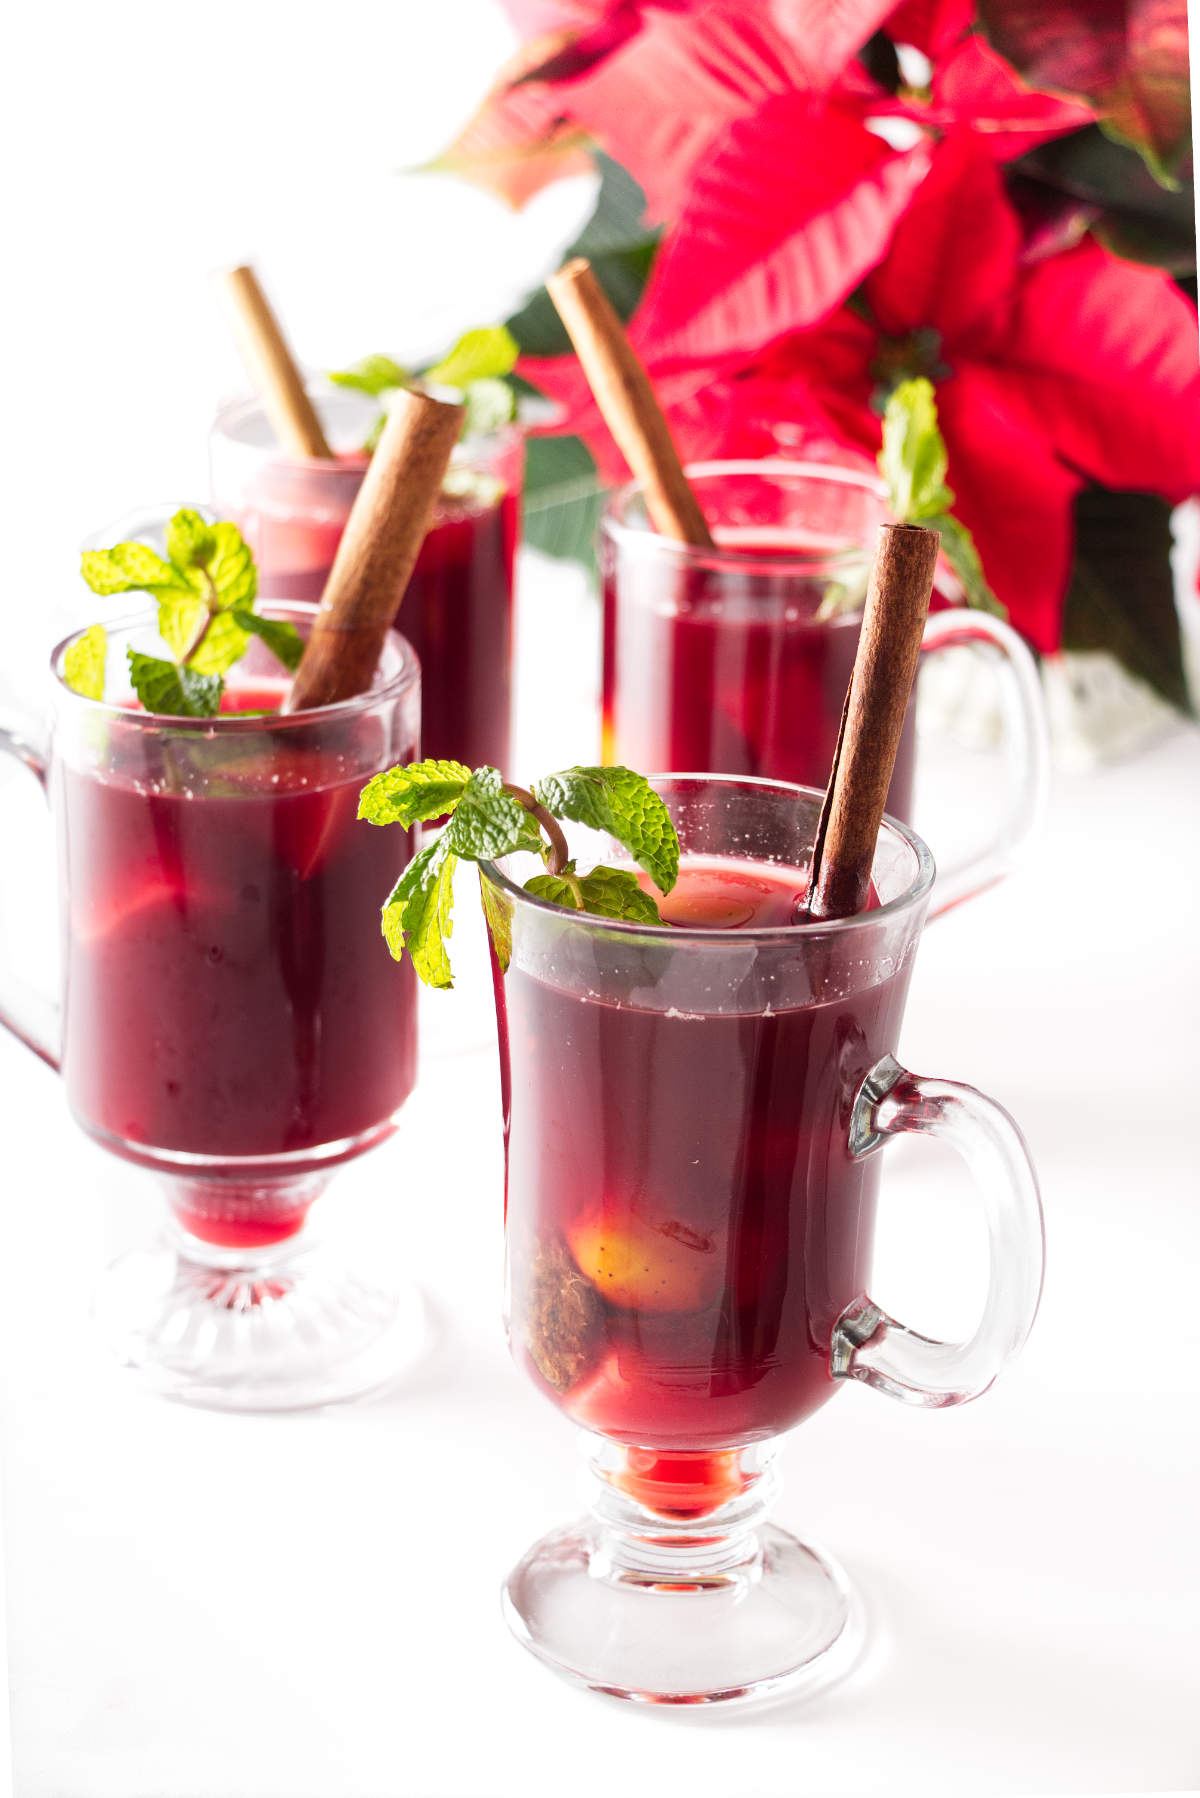 Hibiscus Mint Fruit Punch ~ Yes, more please!